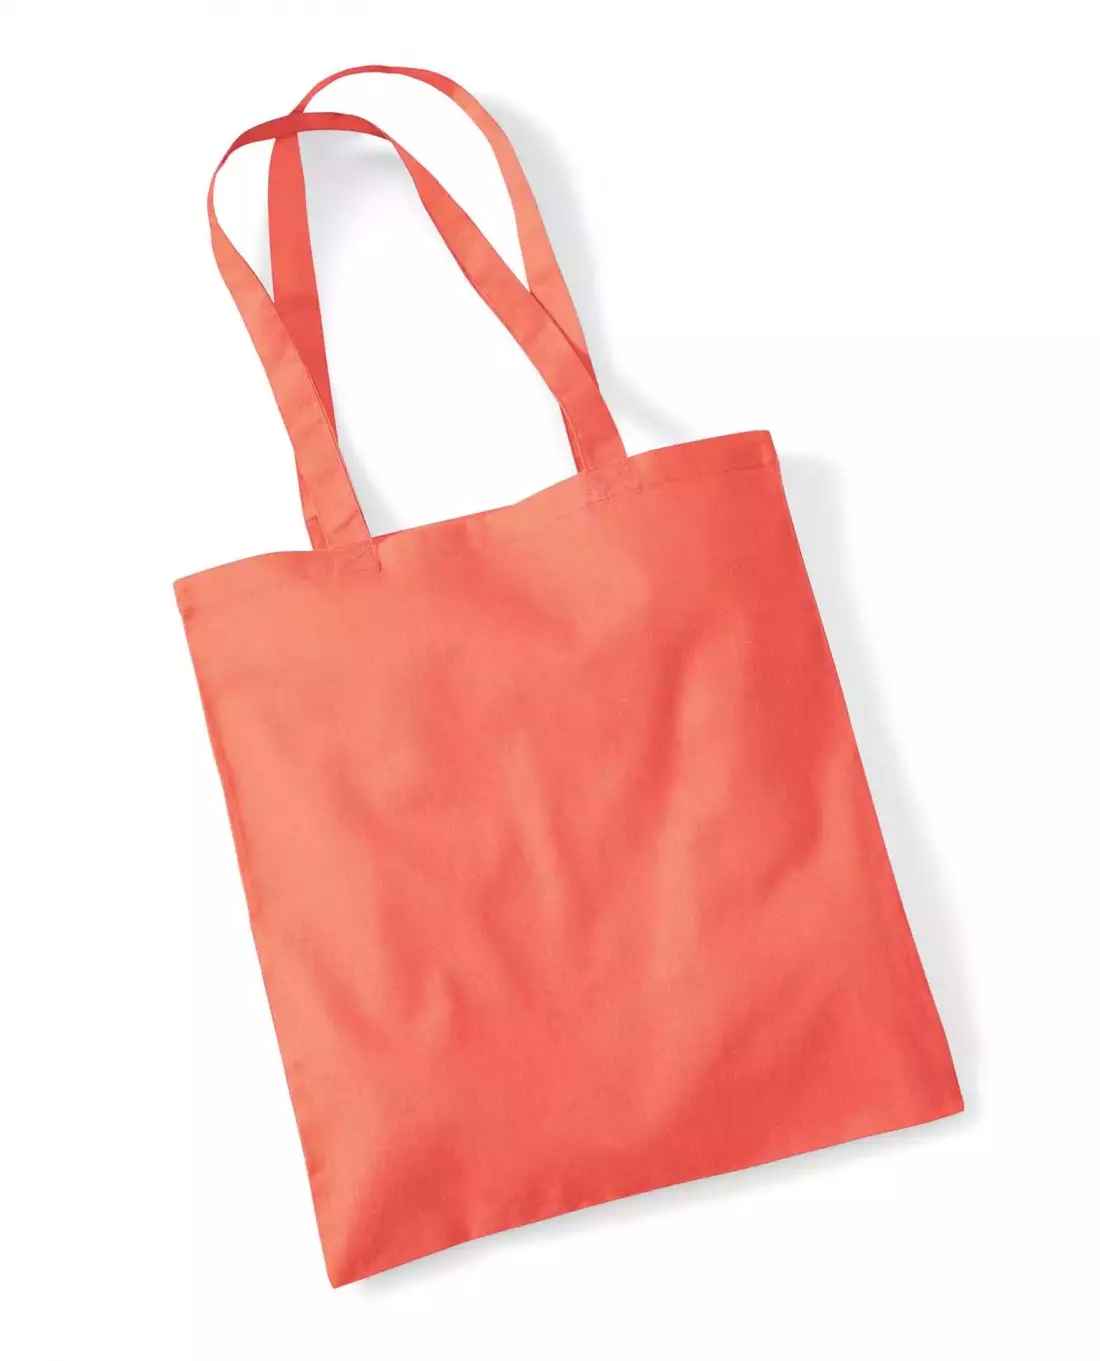 BAG FOR LIFE PUUVILLAKASSI 10 L, Coral